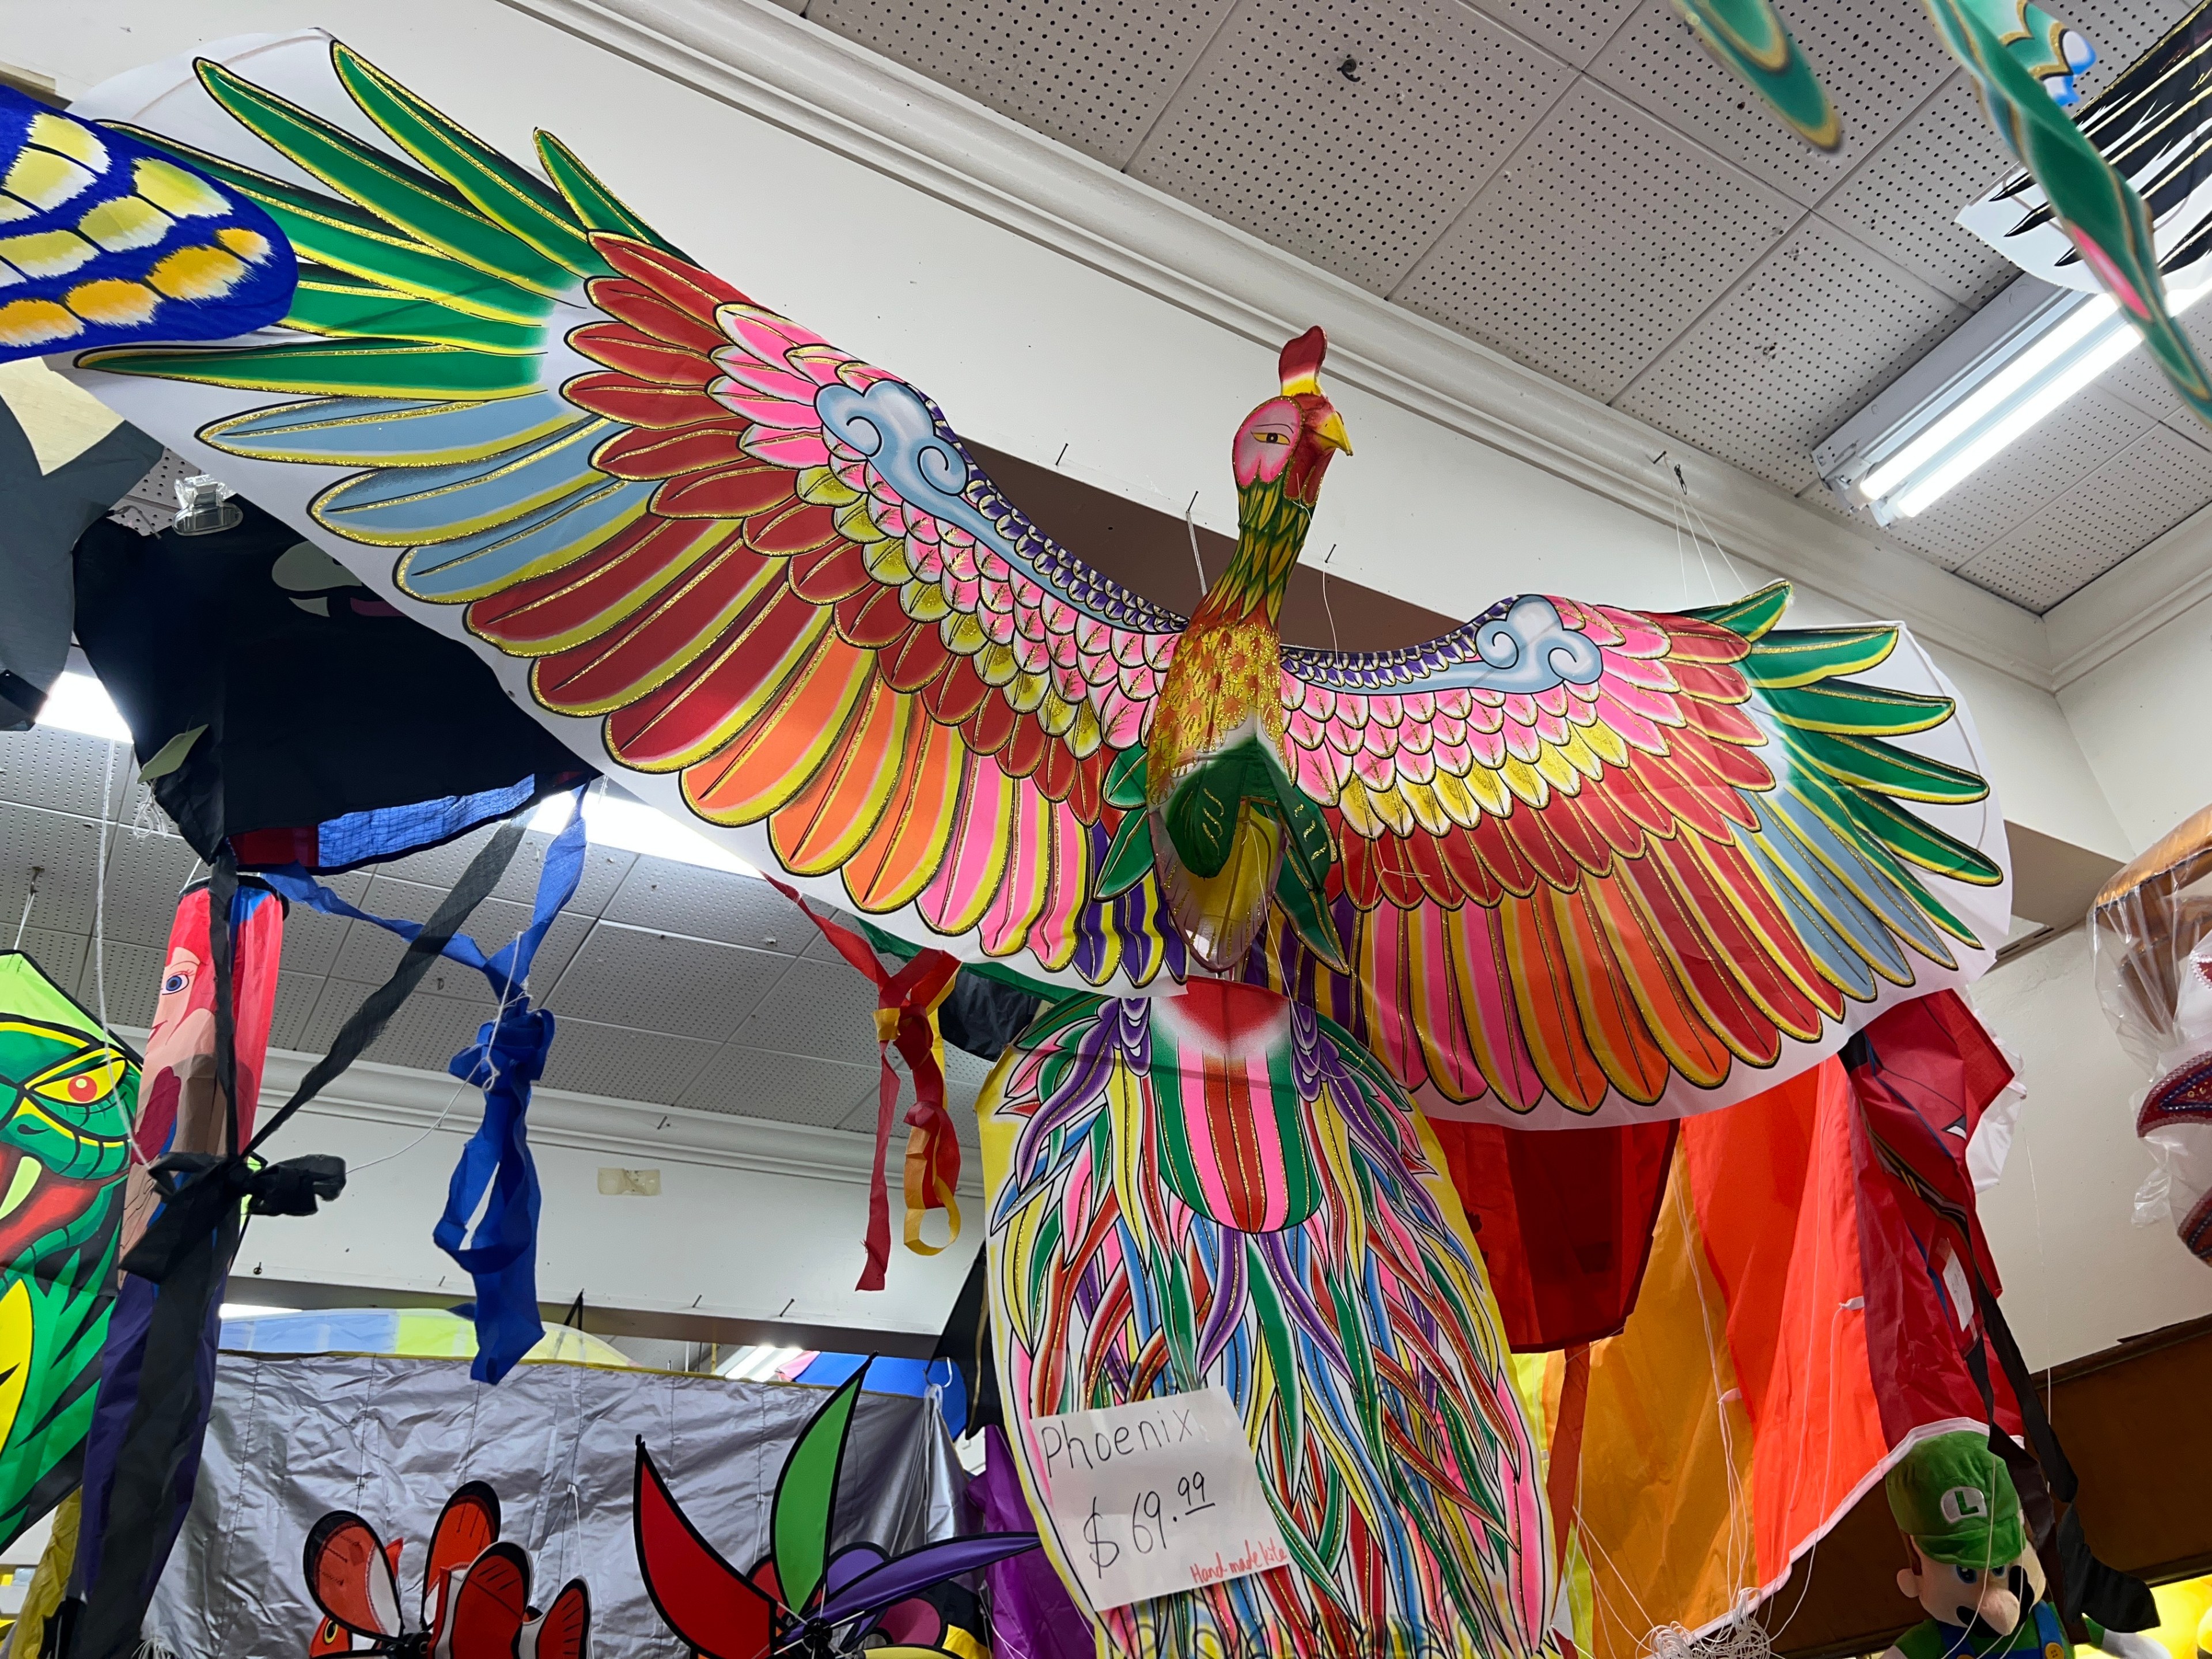 A colorful bird kite hangs from the ceiling of a kite shop.